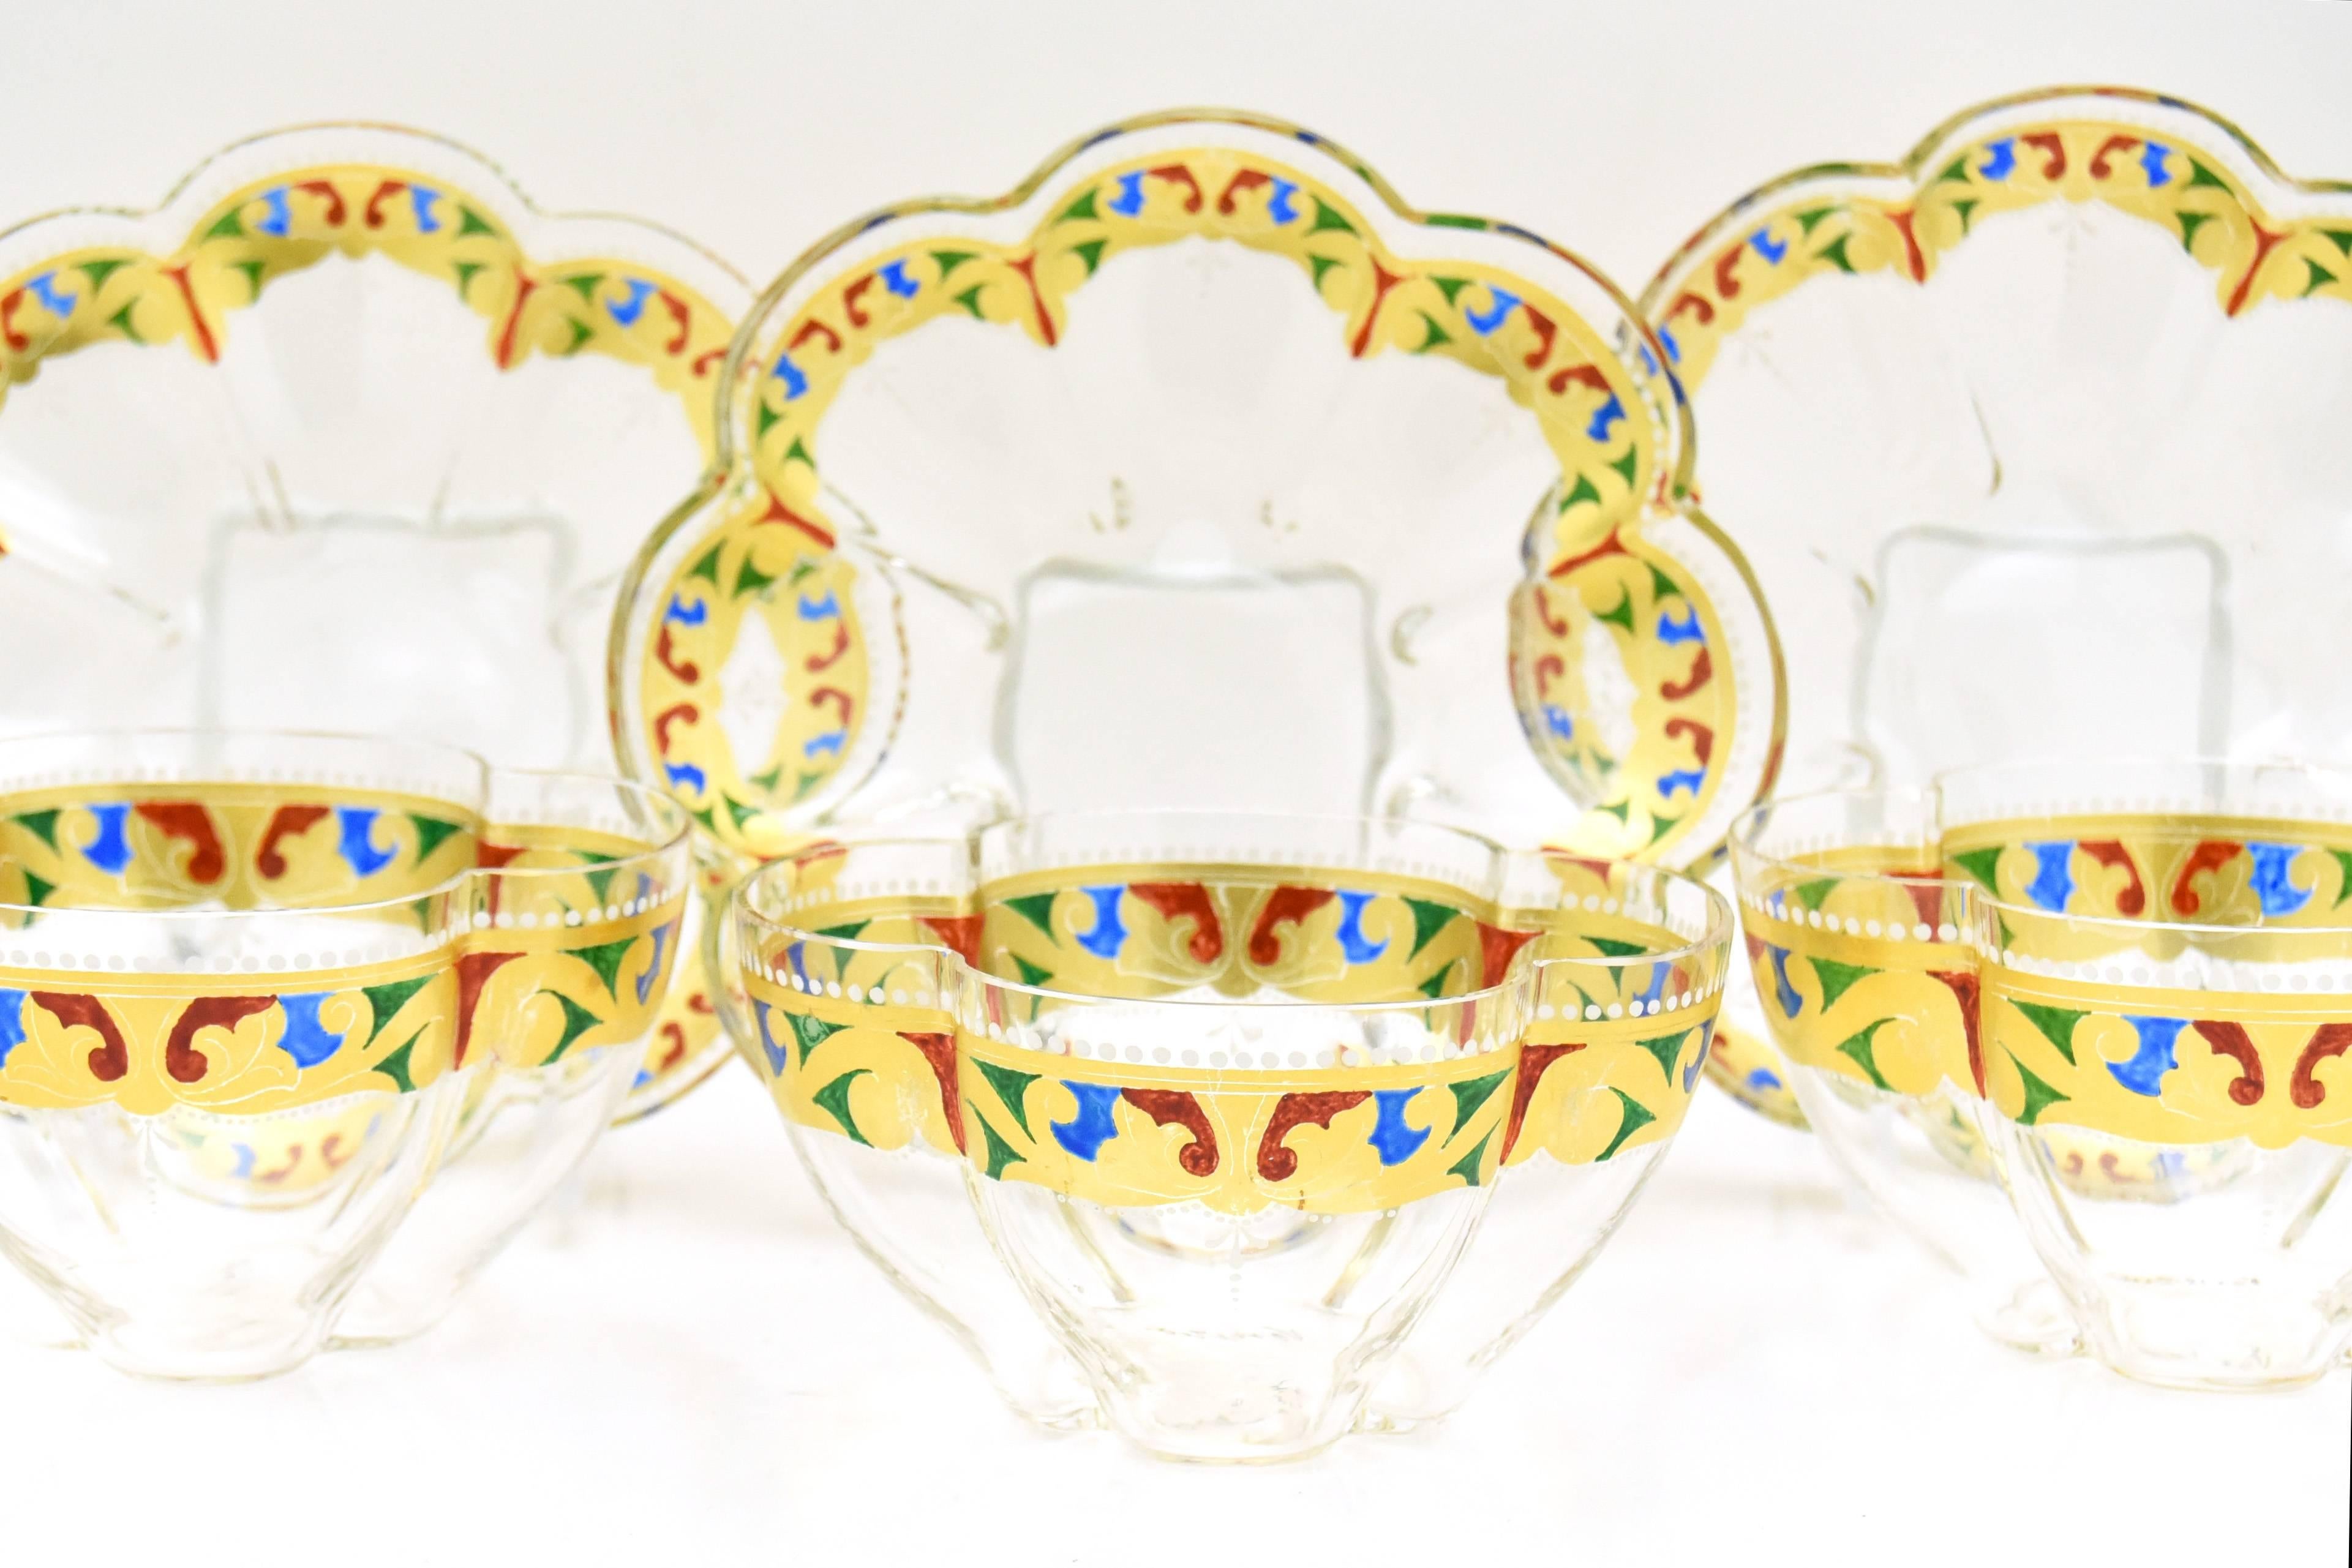 This is an amazing set of 12 handblown bowls and 12 matching under plates in a quatrefoil shape attributed to Salviati. They are expertly decorated in primary jewel tones and the vibrant colors allow them to work beautifully with so many color